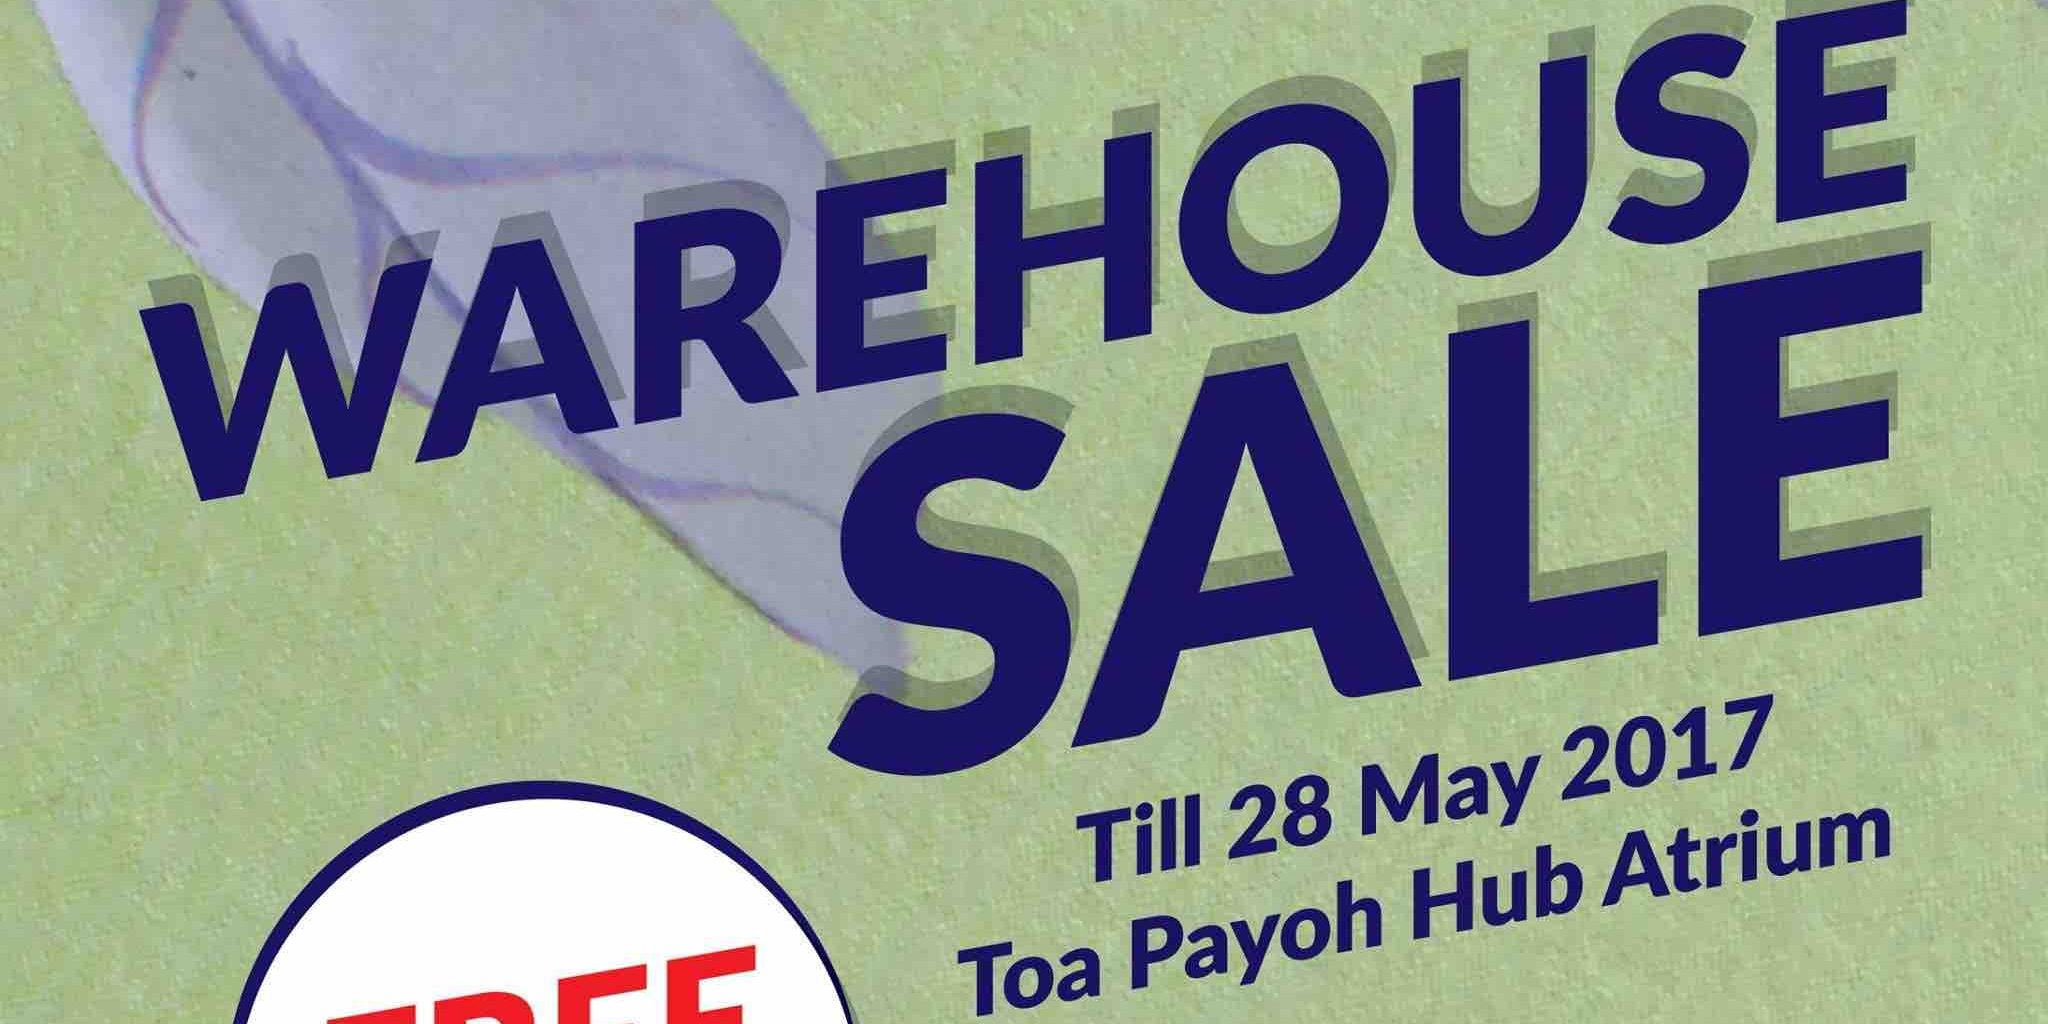 CITIGEMS Singapore Toa Payoh Hub Warehouse Sale Up to 80% Off Promotion 24-28 May 2017